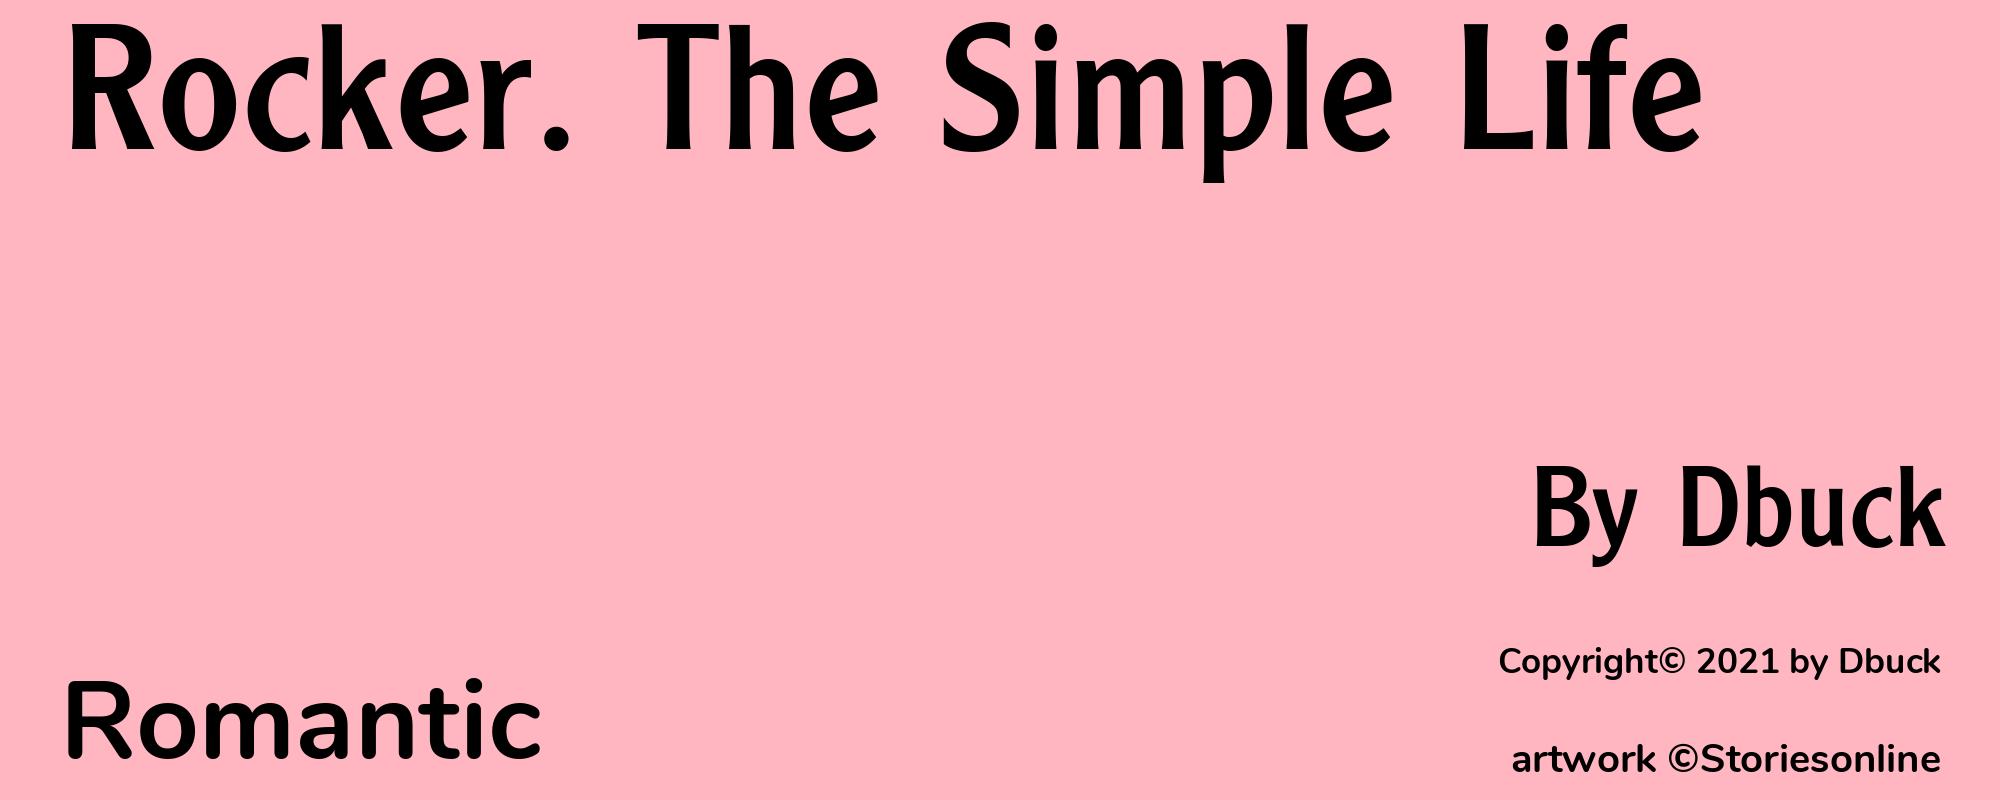 Rocker. The Simple Life - Cover